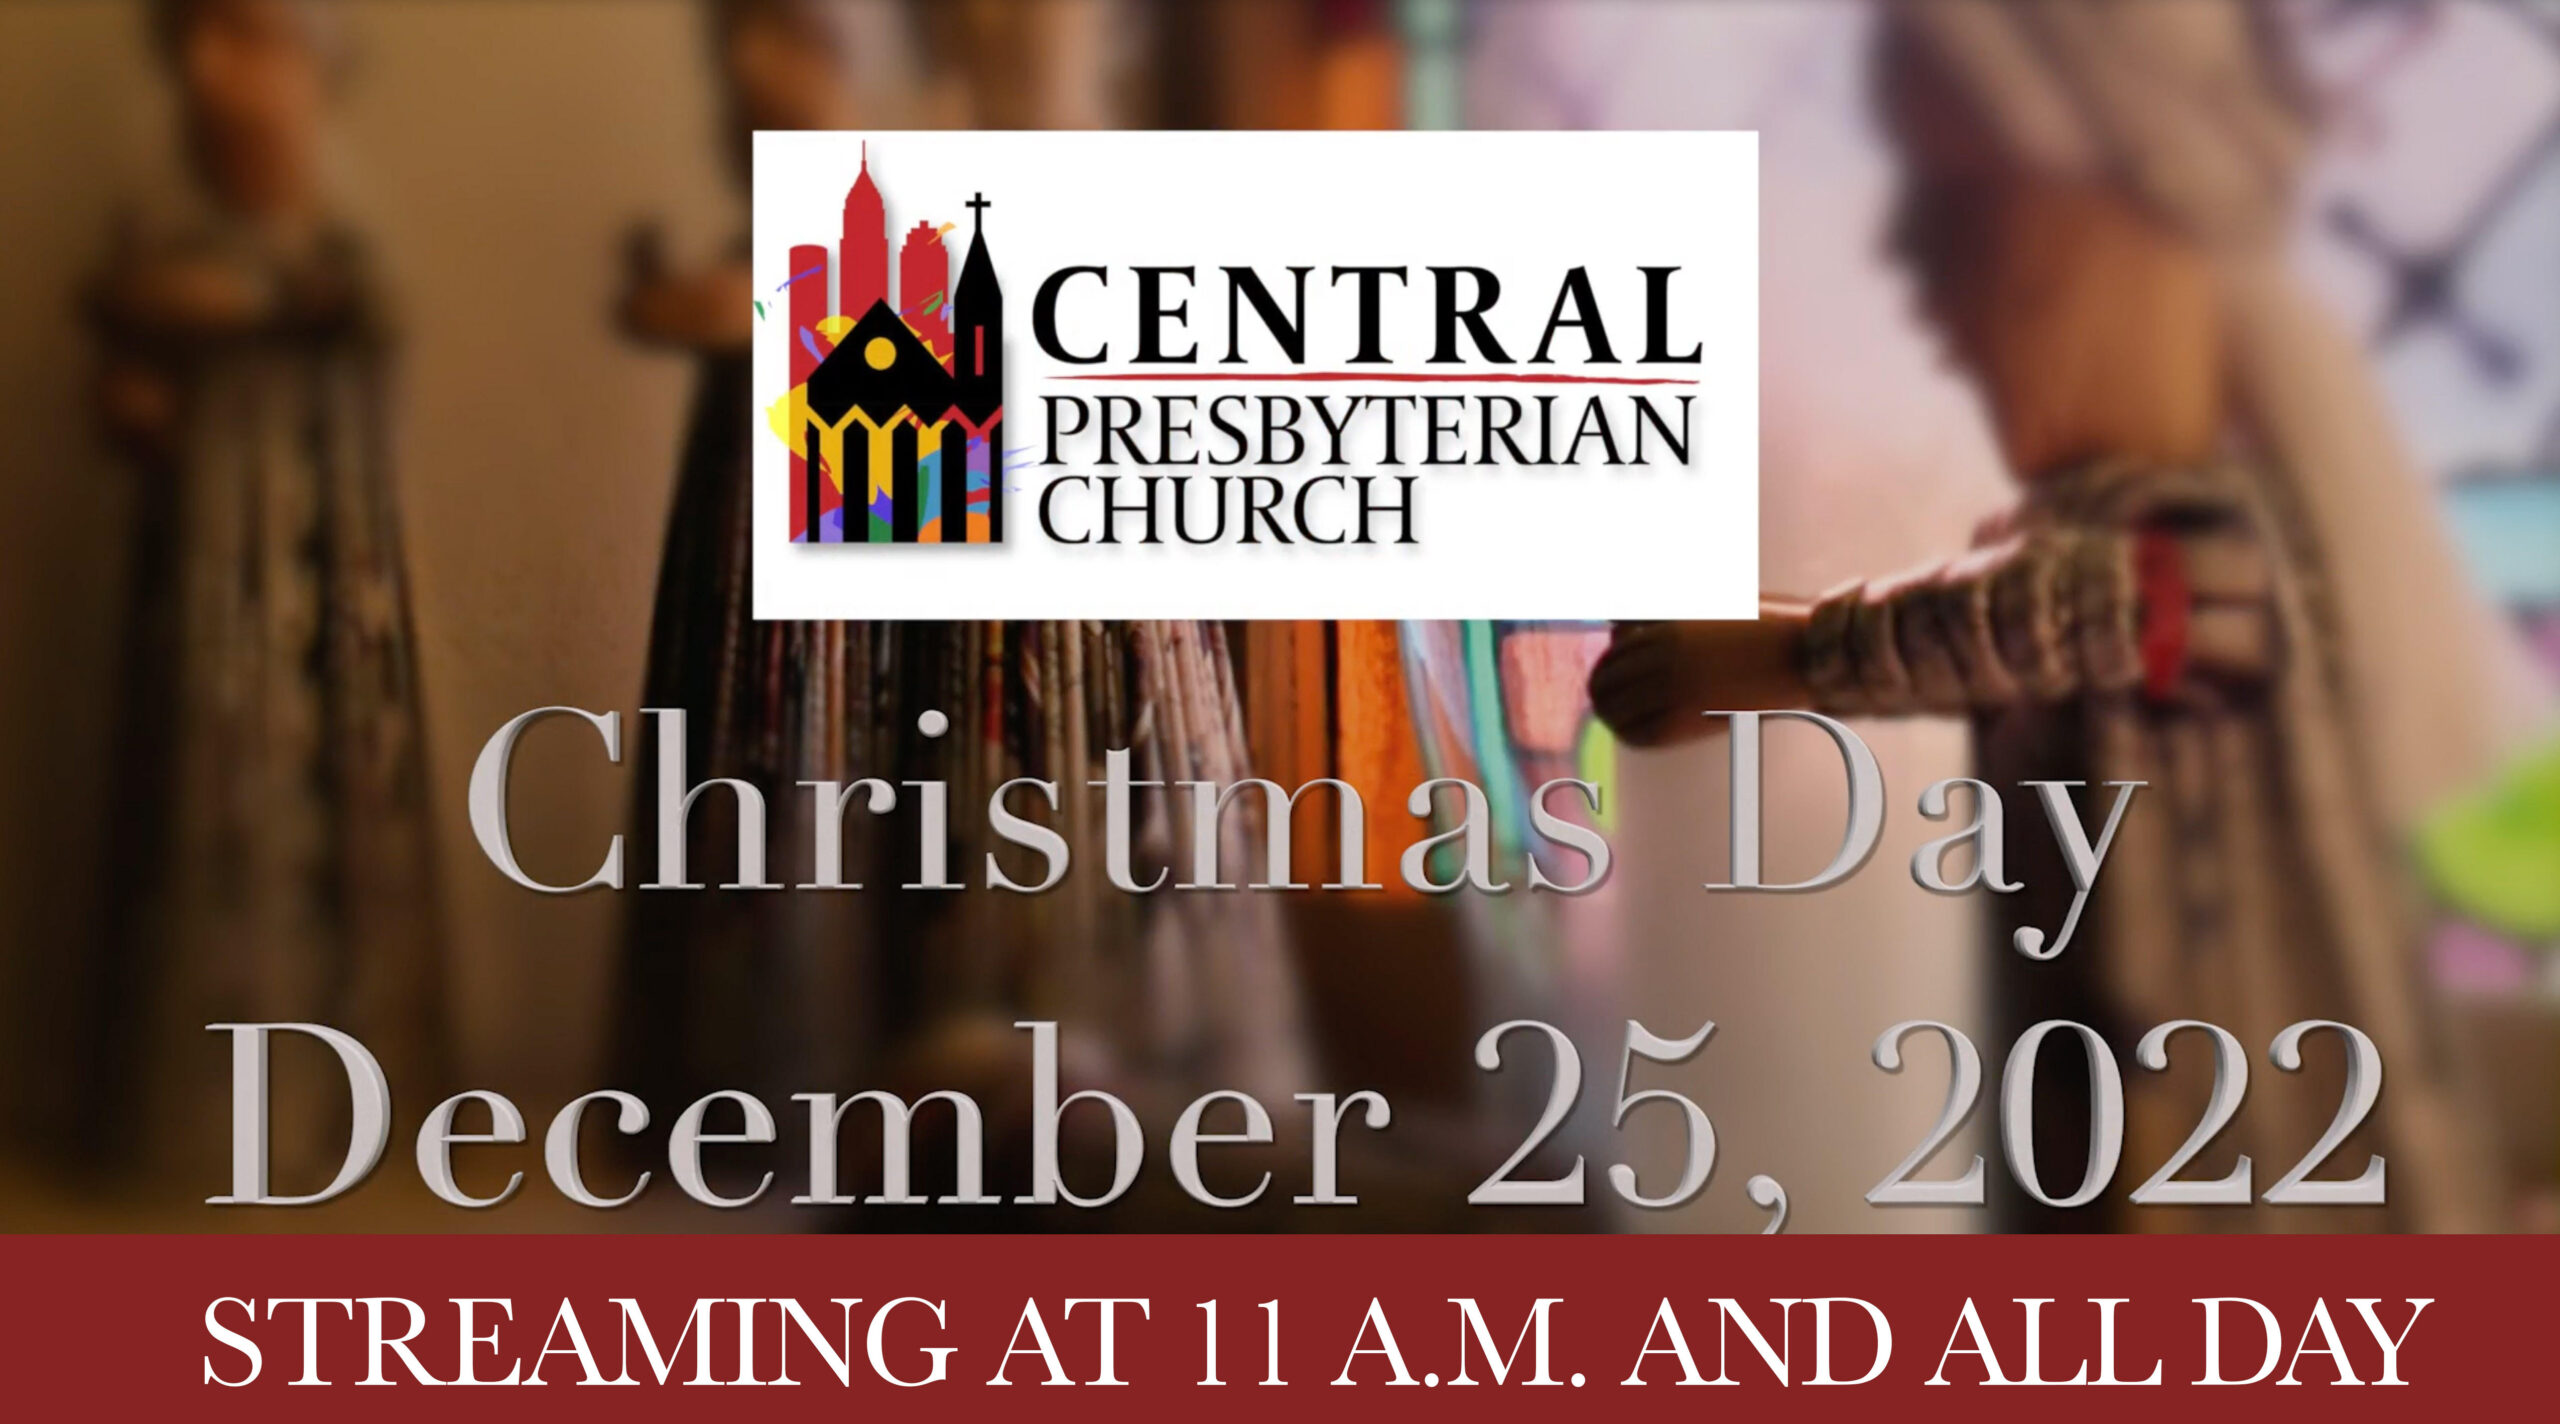 Central’s Christmas Day Worship